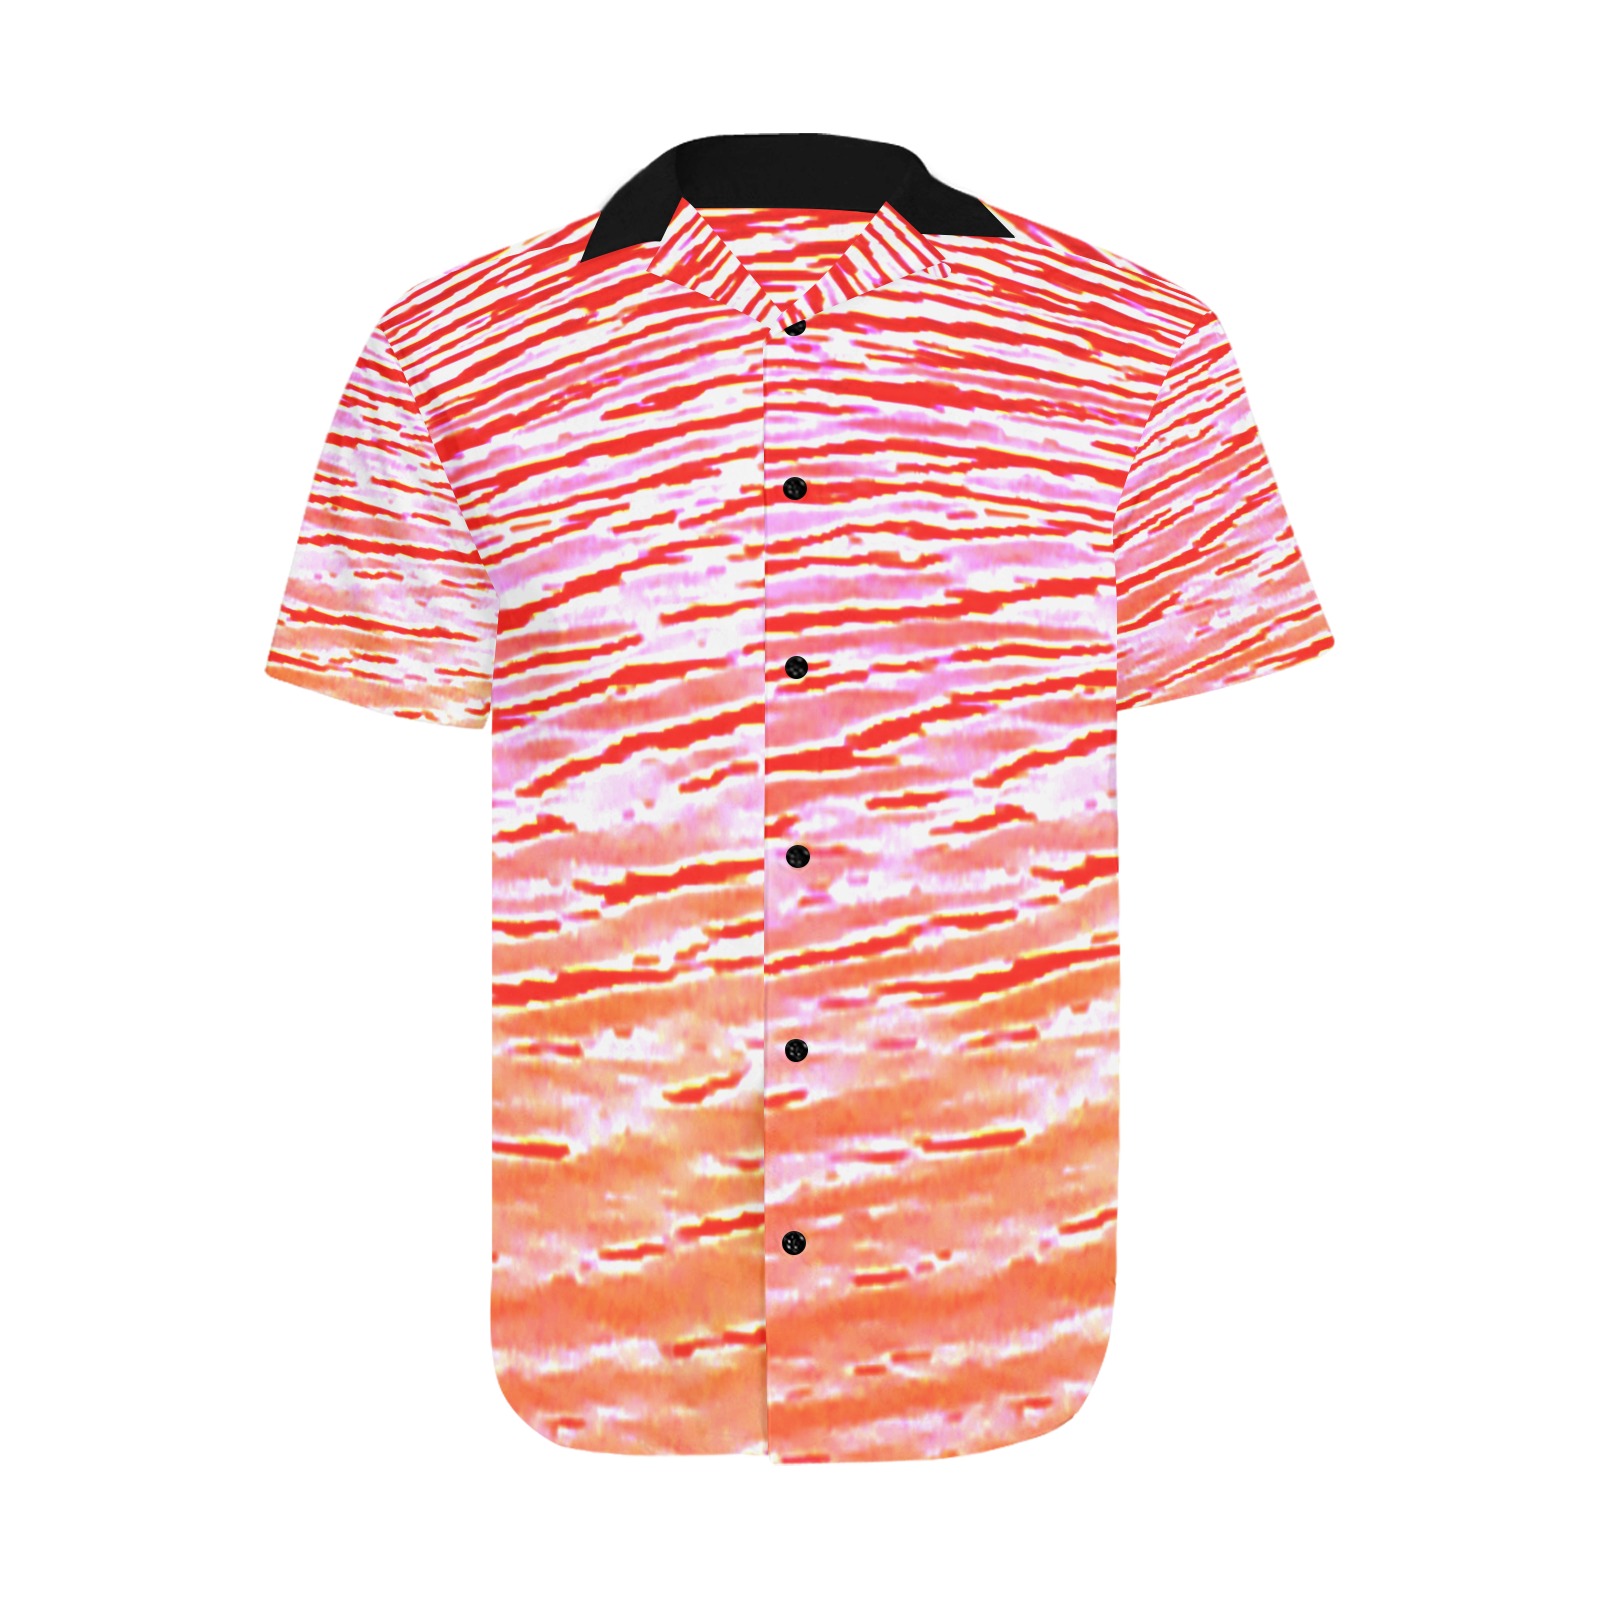 Orange and red water Men's Short Sleeve Shirt with Lapel Collar (Model T54)